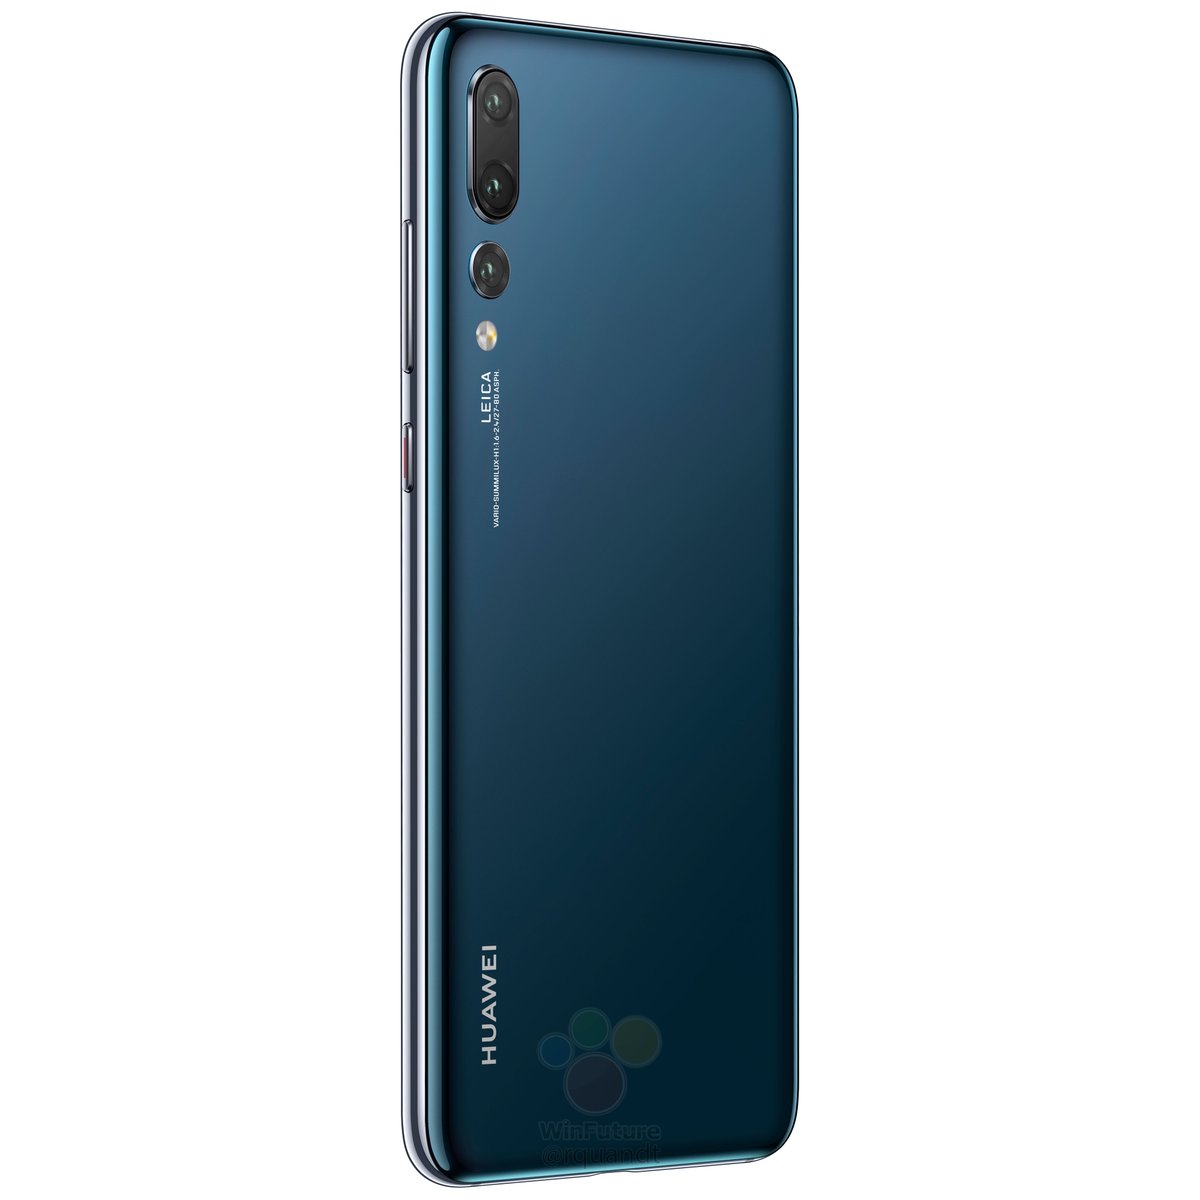 Android pie huawei p20 pro release date